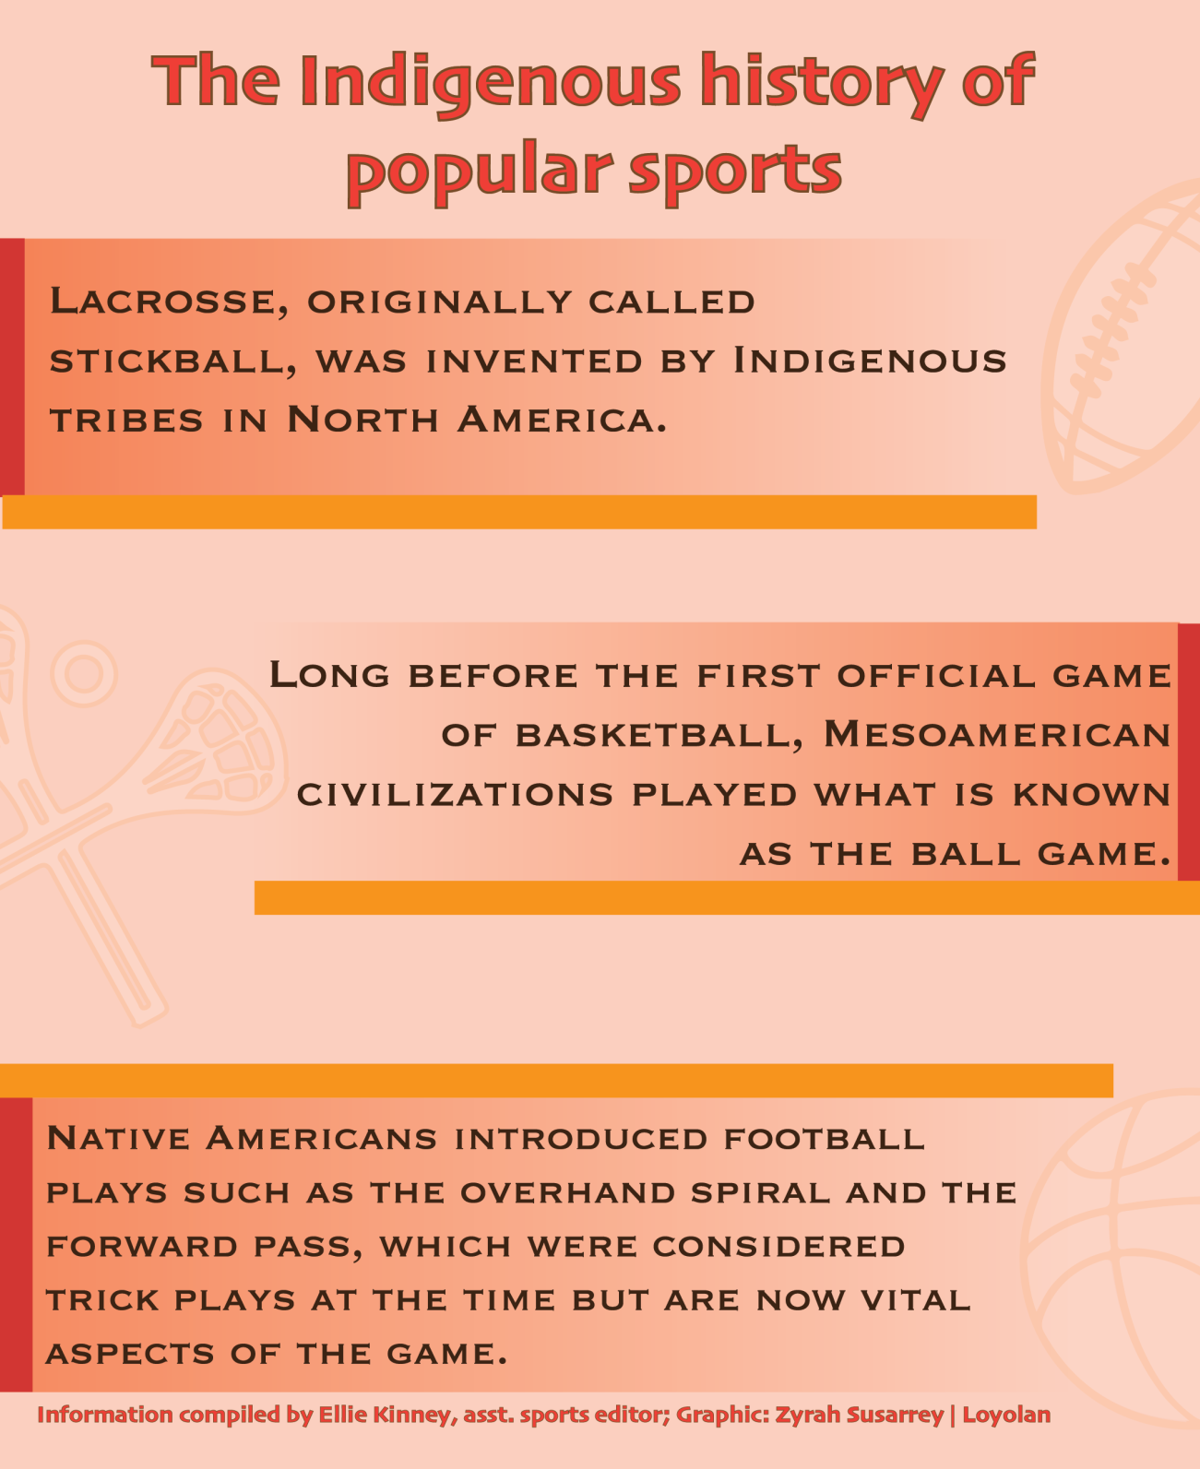 The original contact sport': How lacrosse has Native American roots